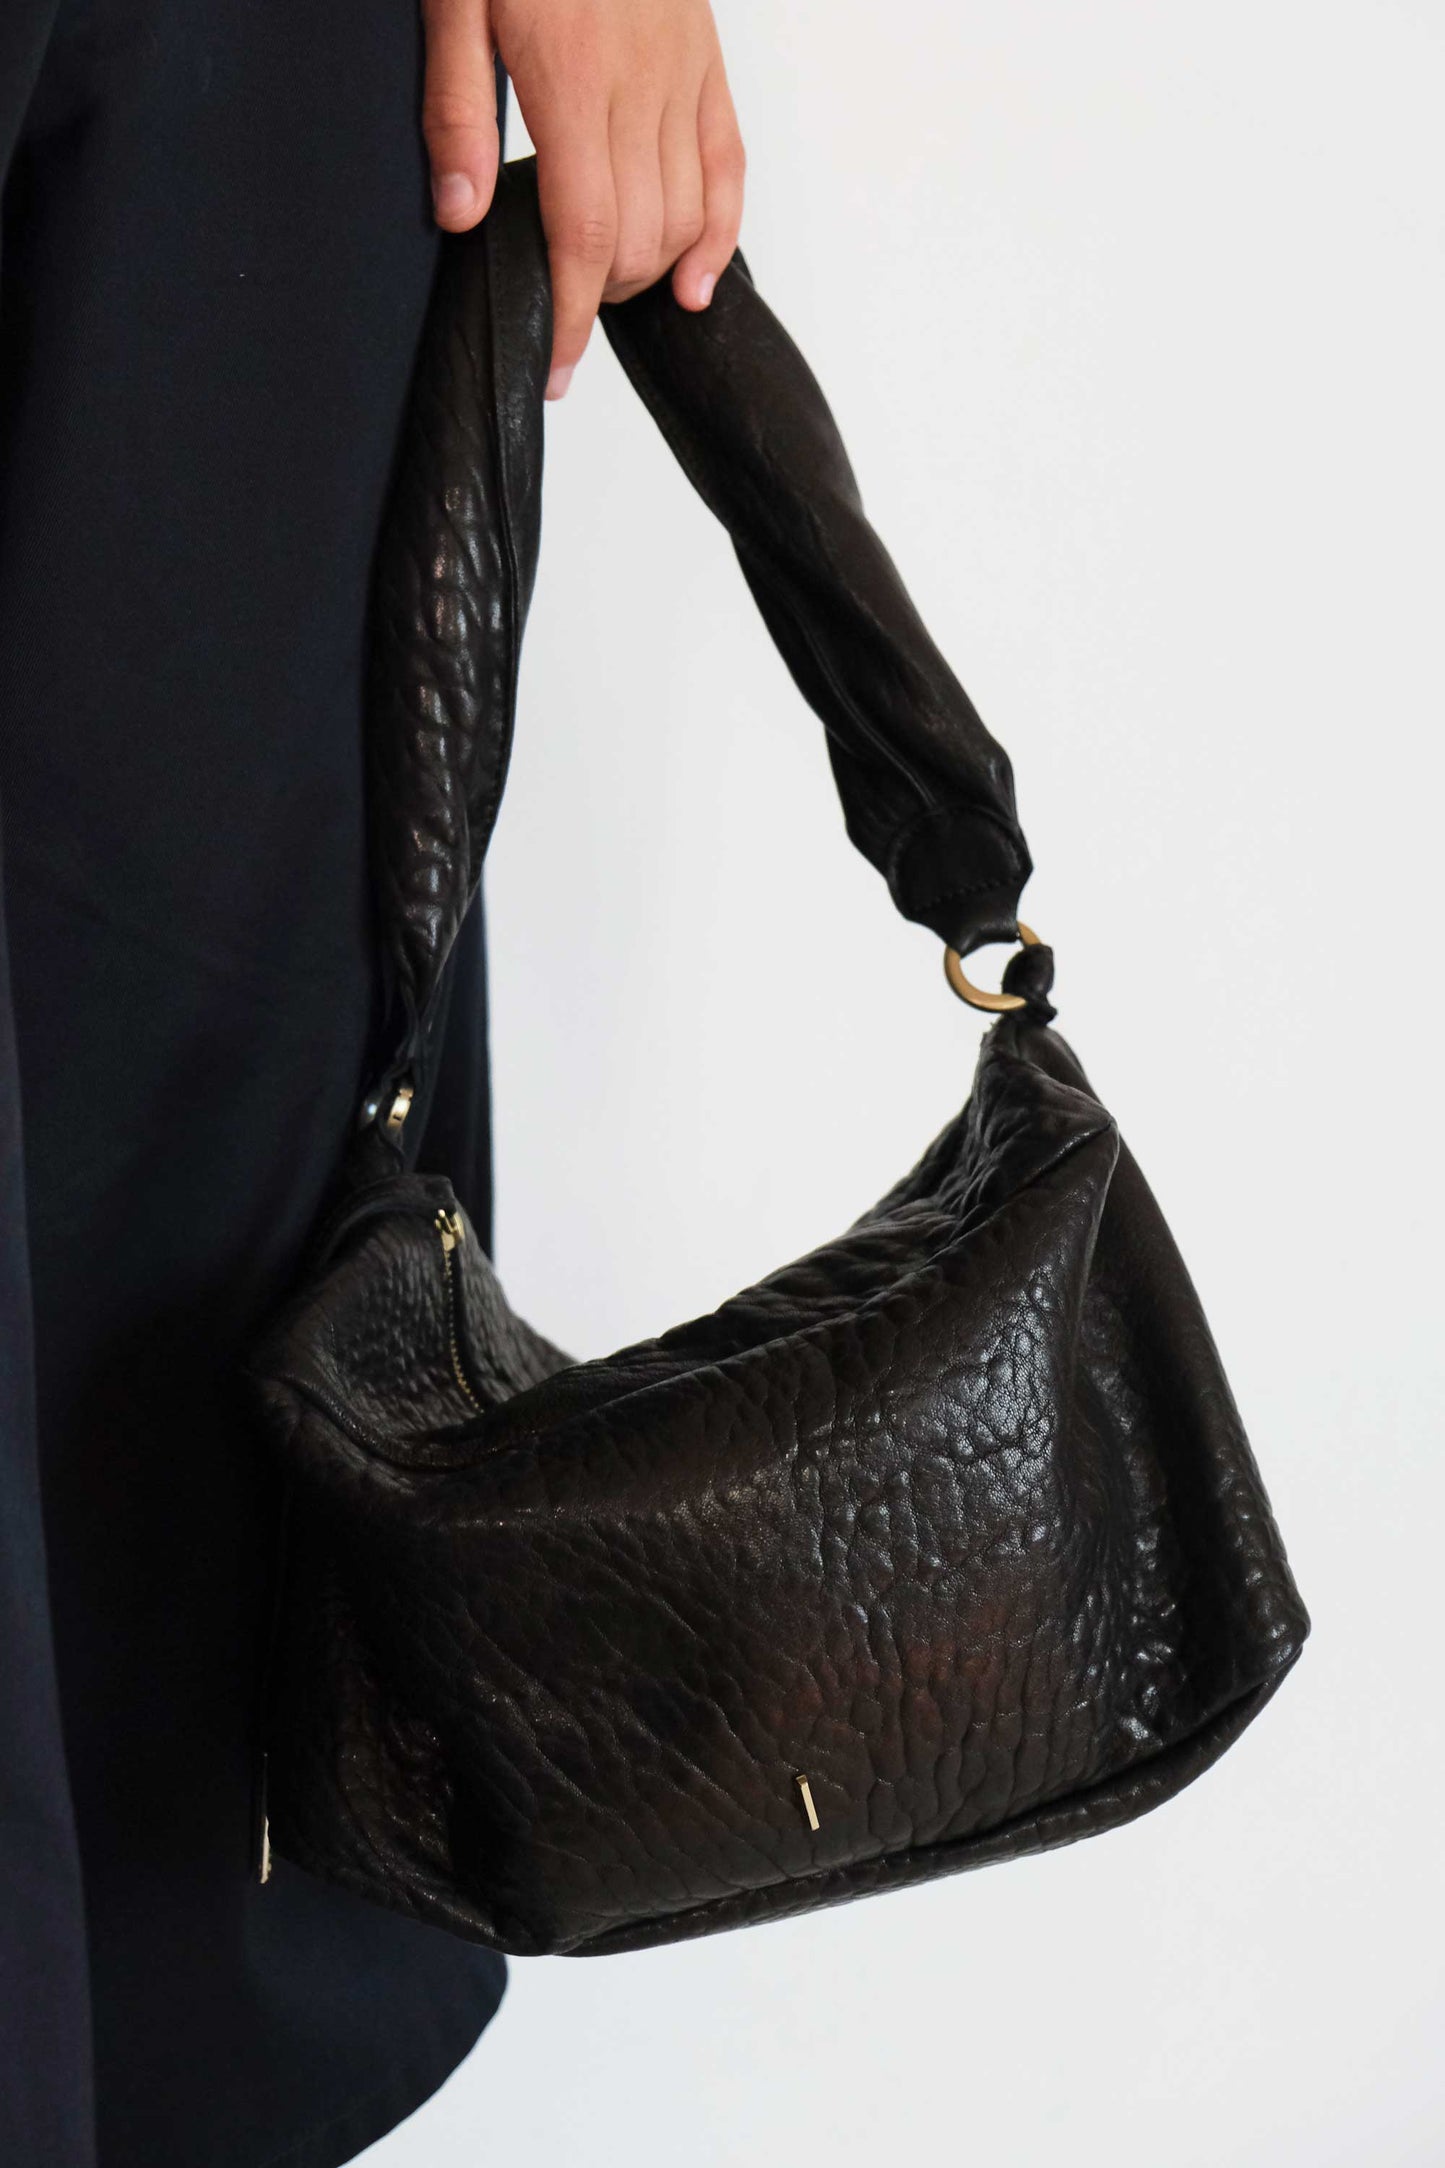 Bobo Torchon top handle bag in mutton vegetable leather